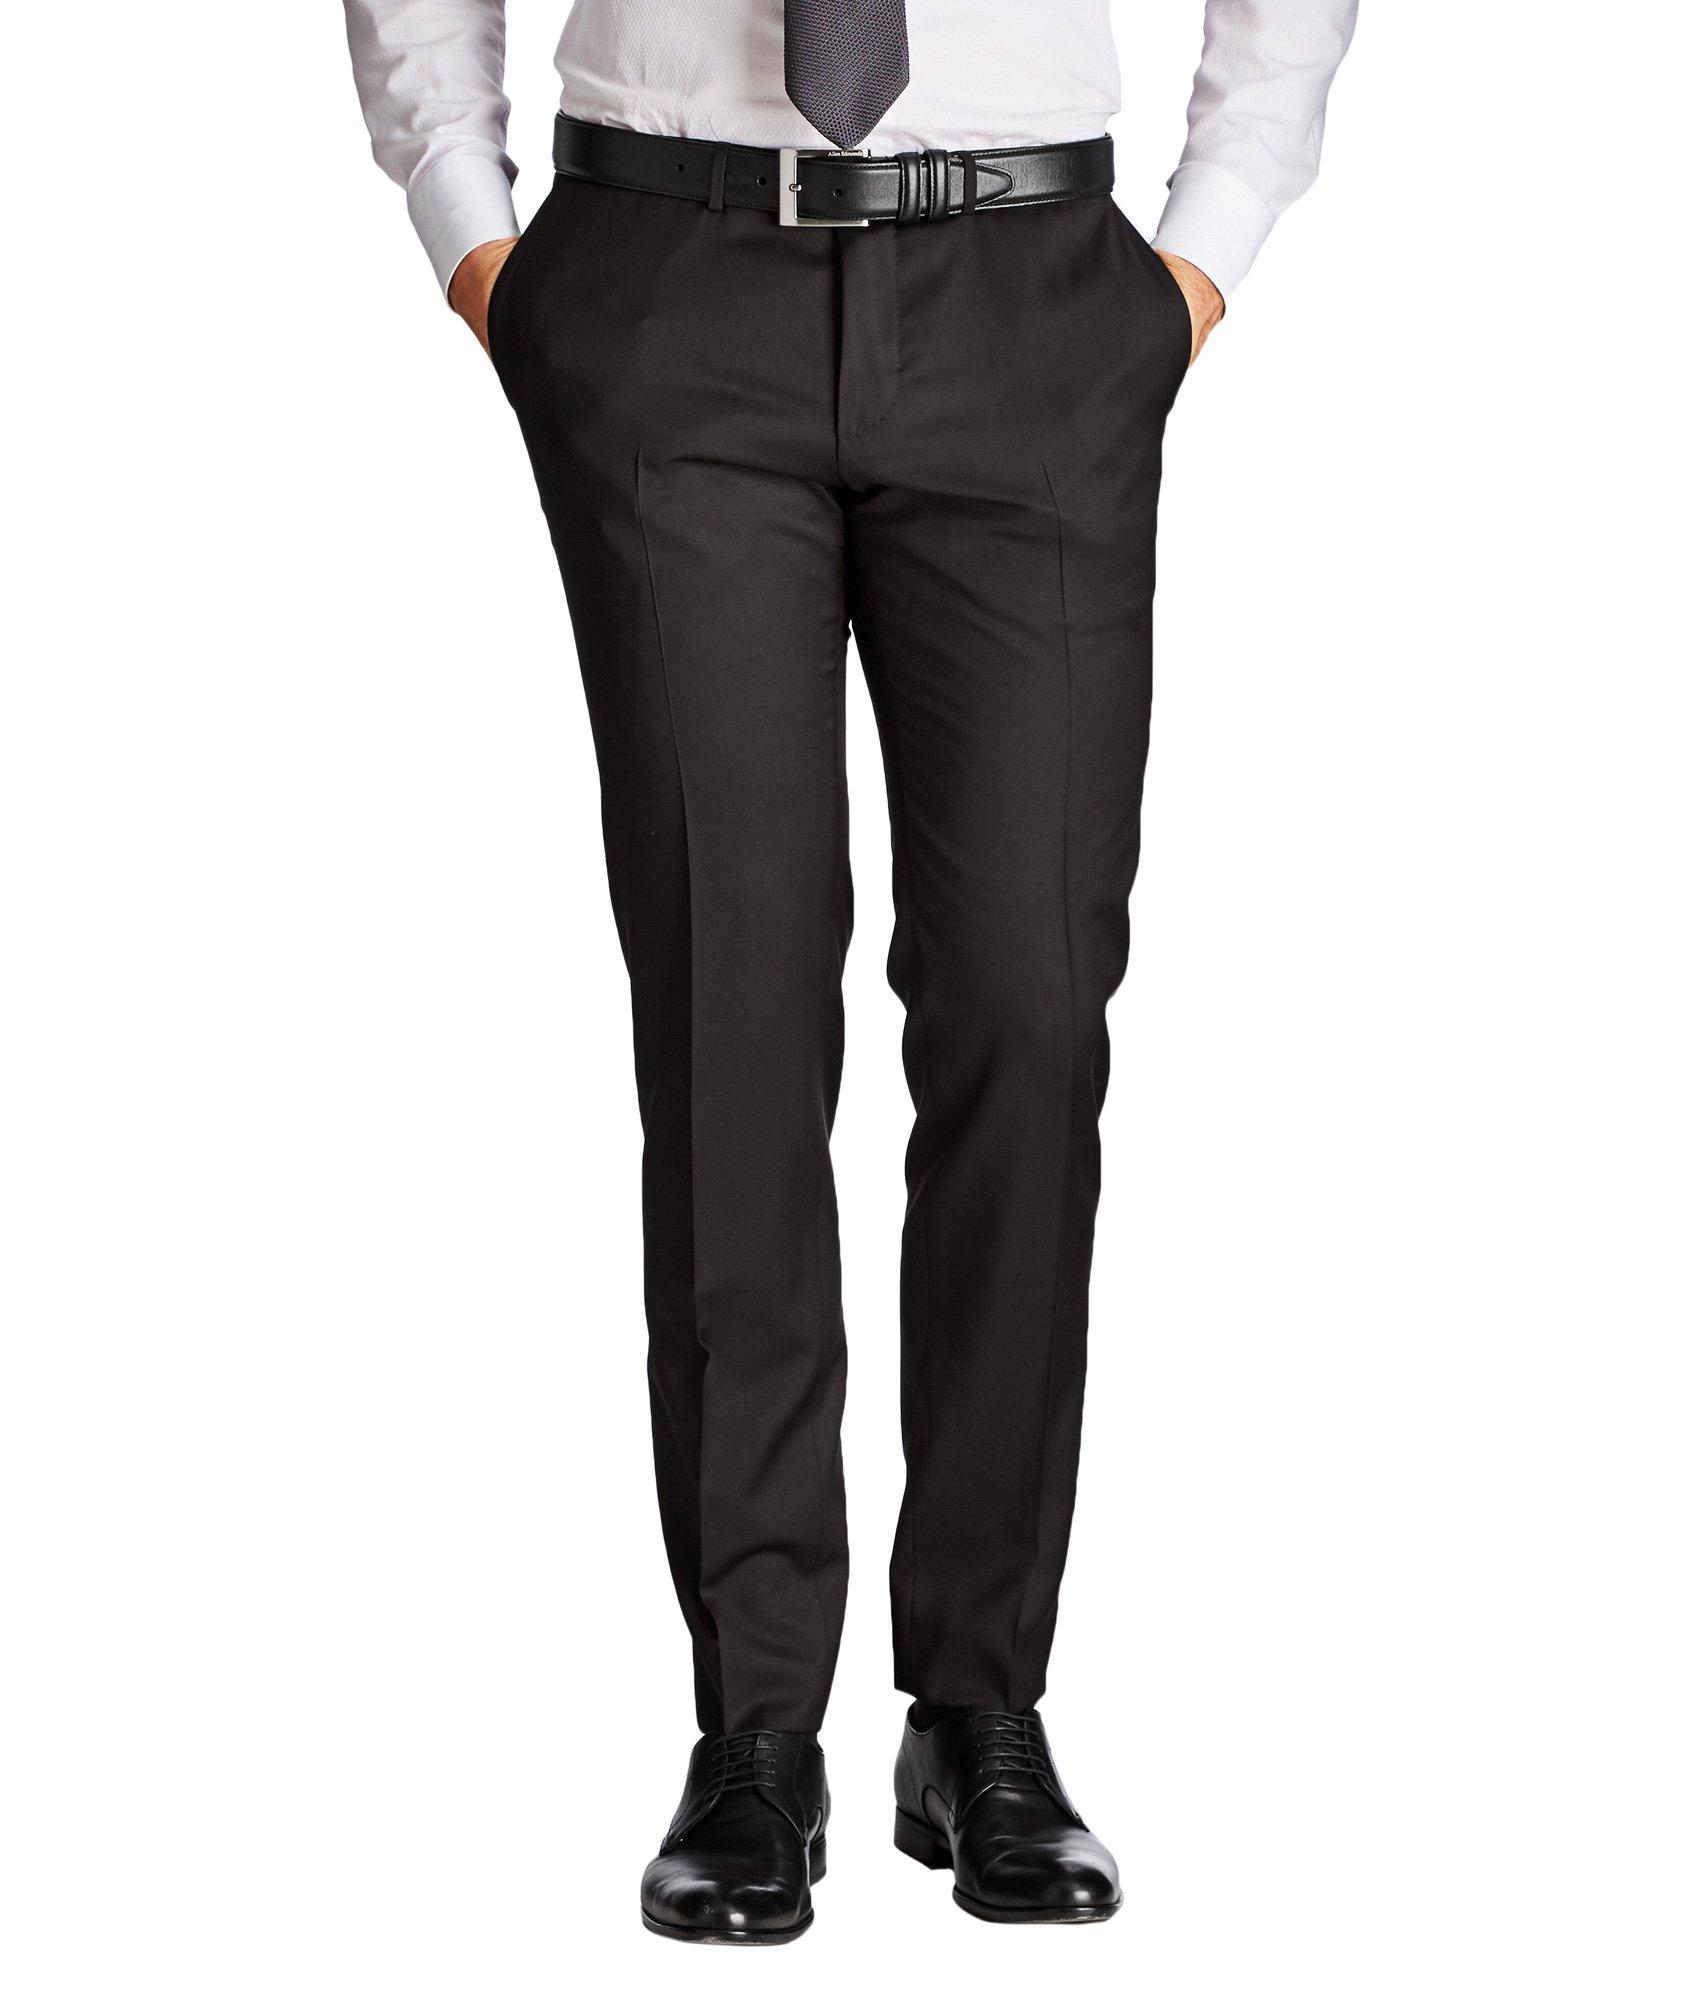 Wave "Create Your Look" Dress Pants image 0